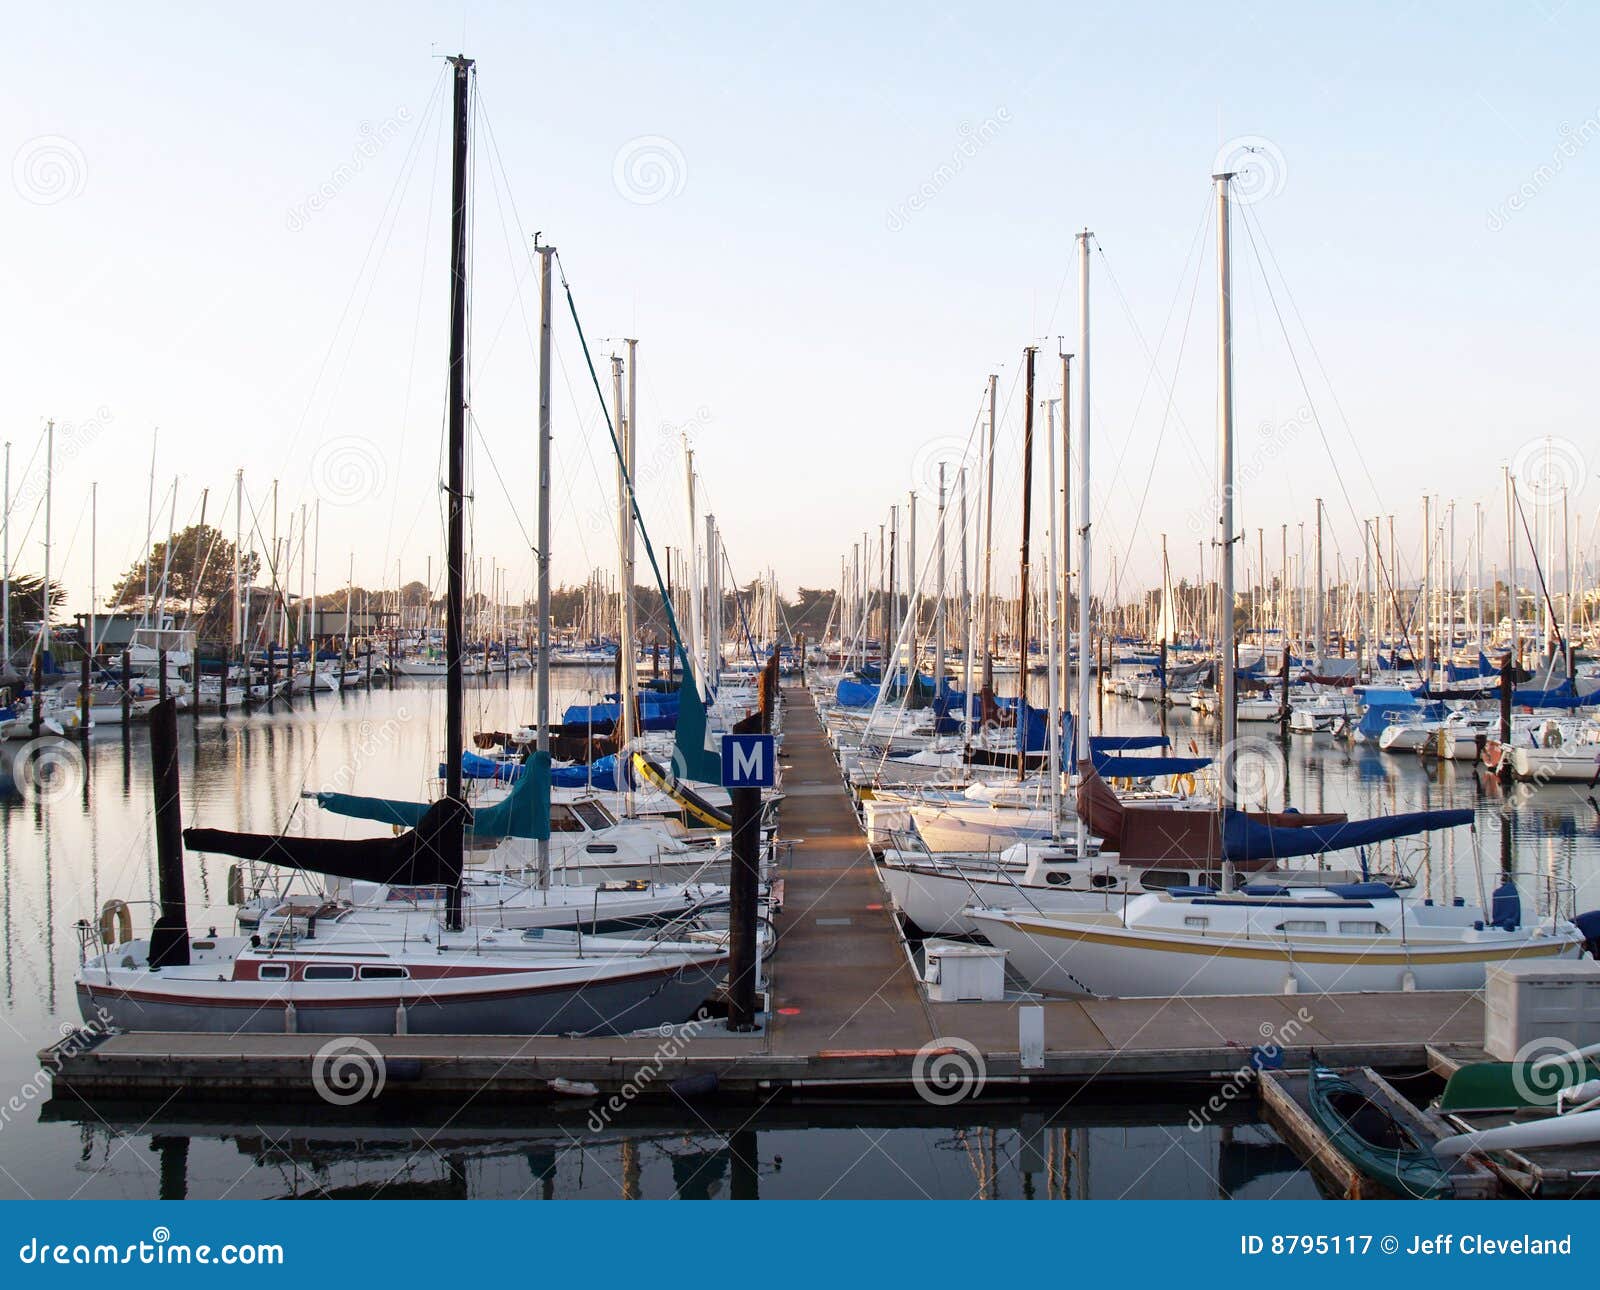 Sailboats Tied Up in Berths in Marina Stock Image - Image of boat, pier ...